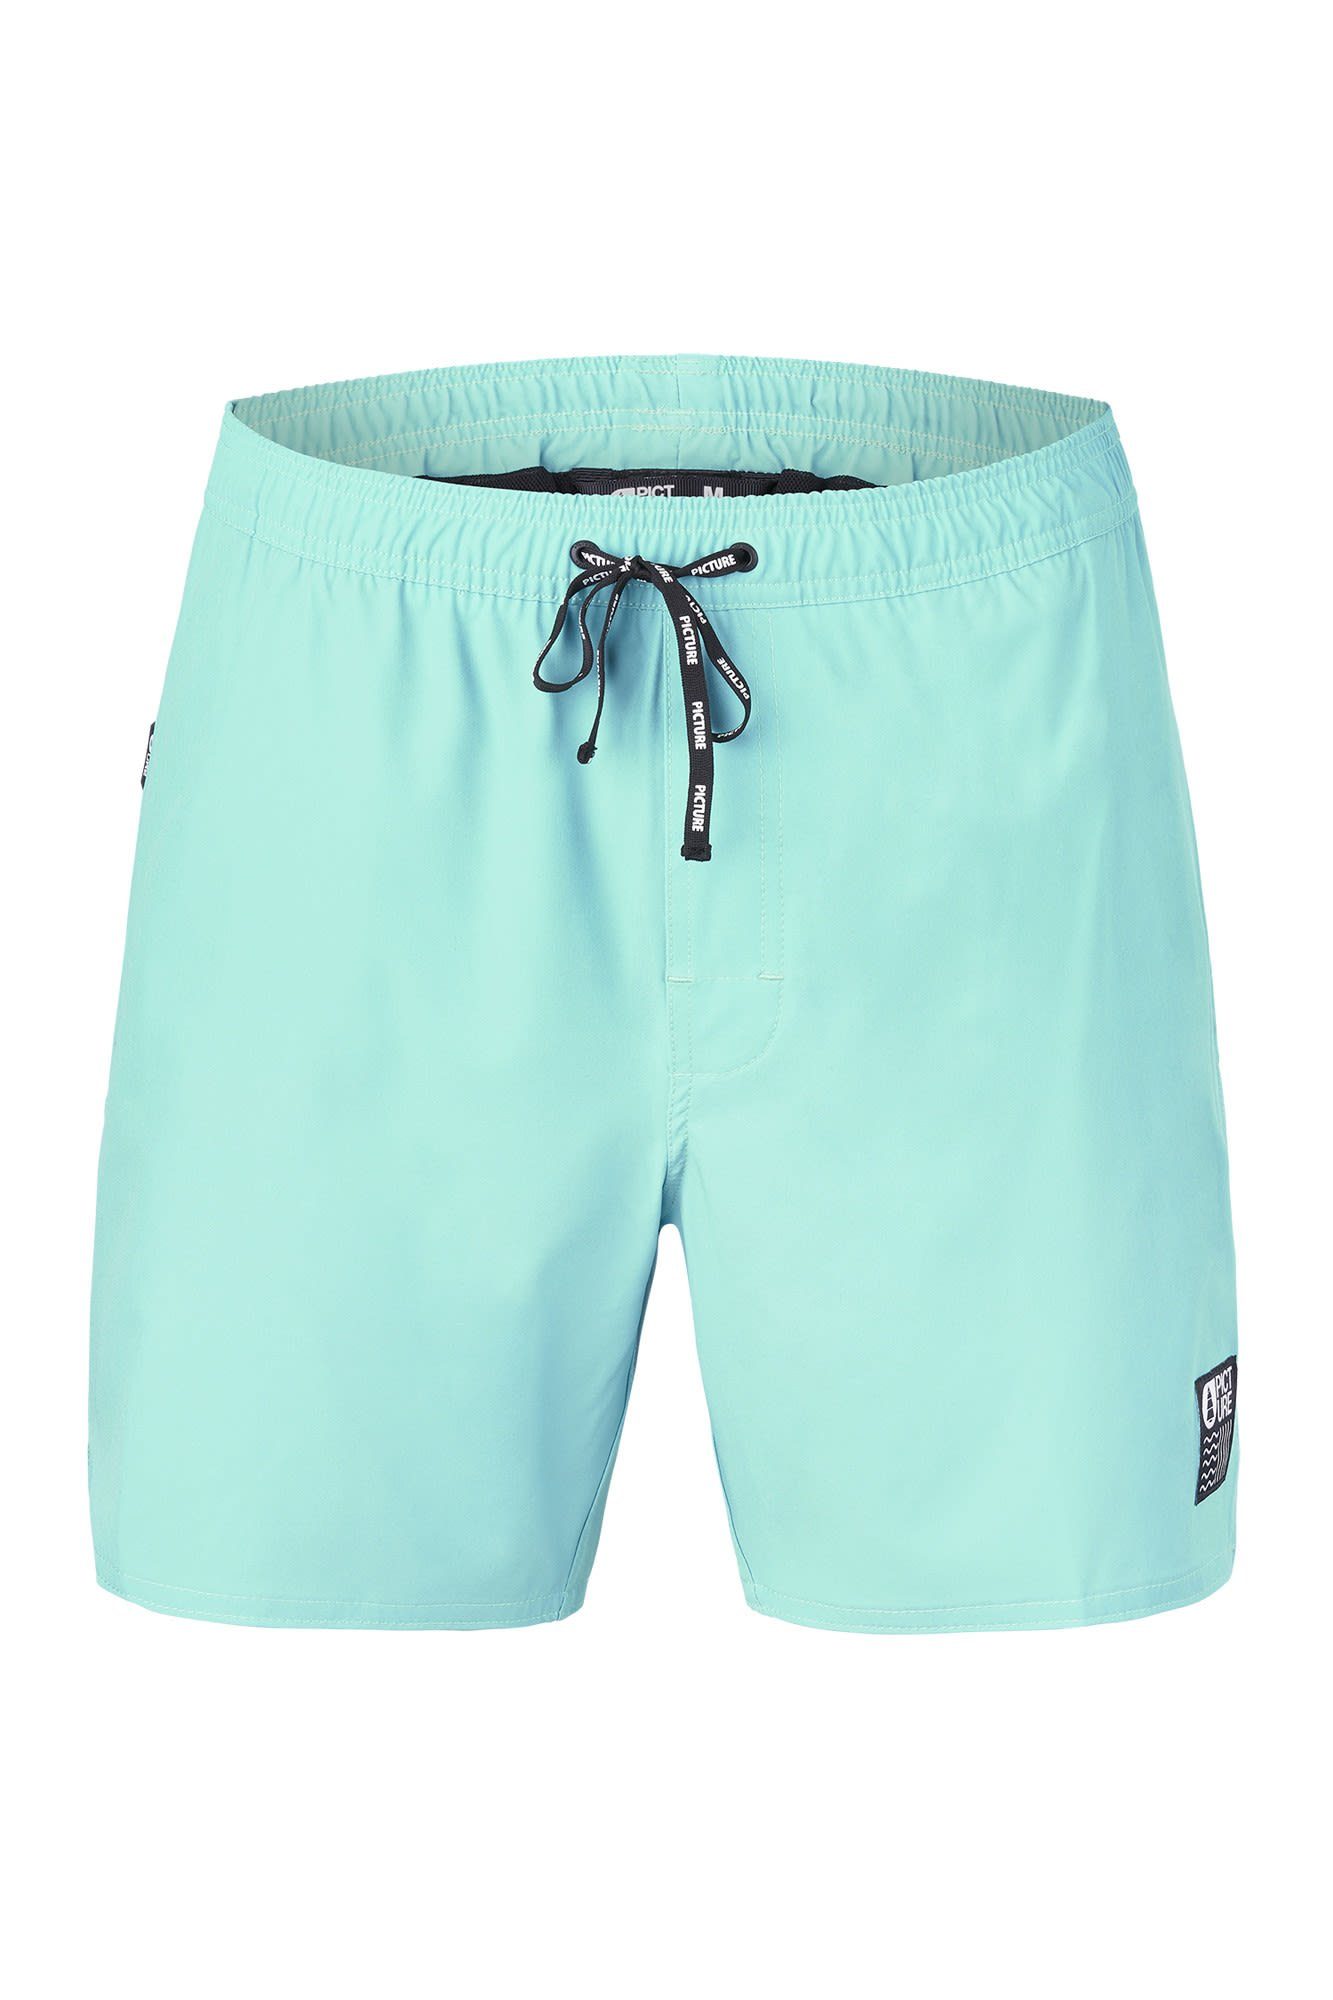 Picture Badeshorts Picture M Solid Herren Boardshorts 15 Turquoise Blue Piau